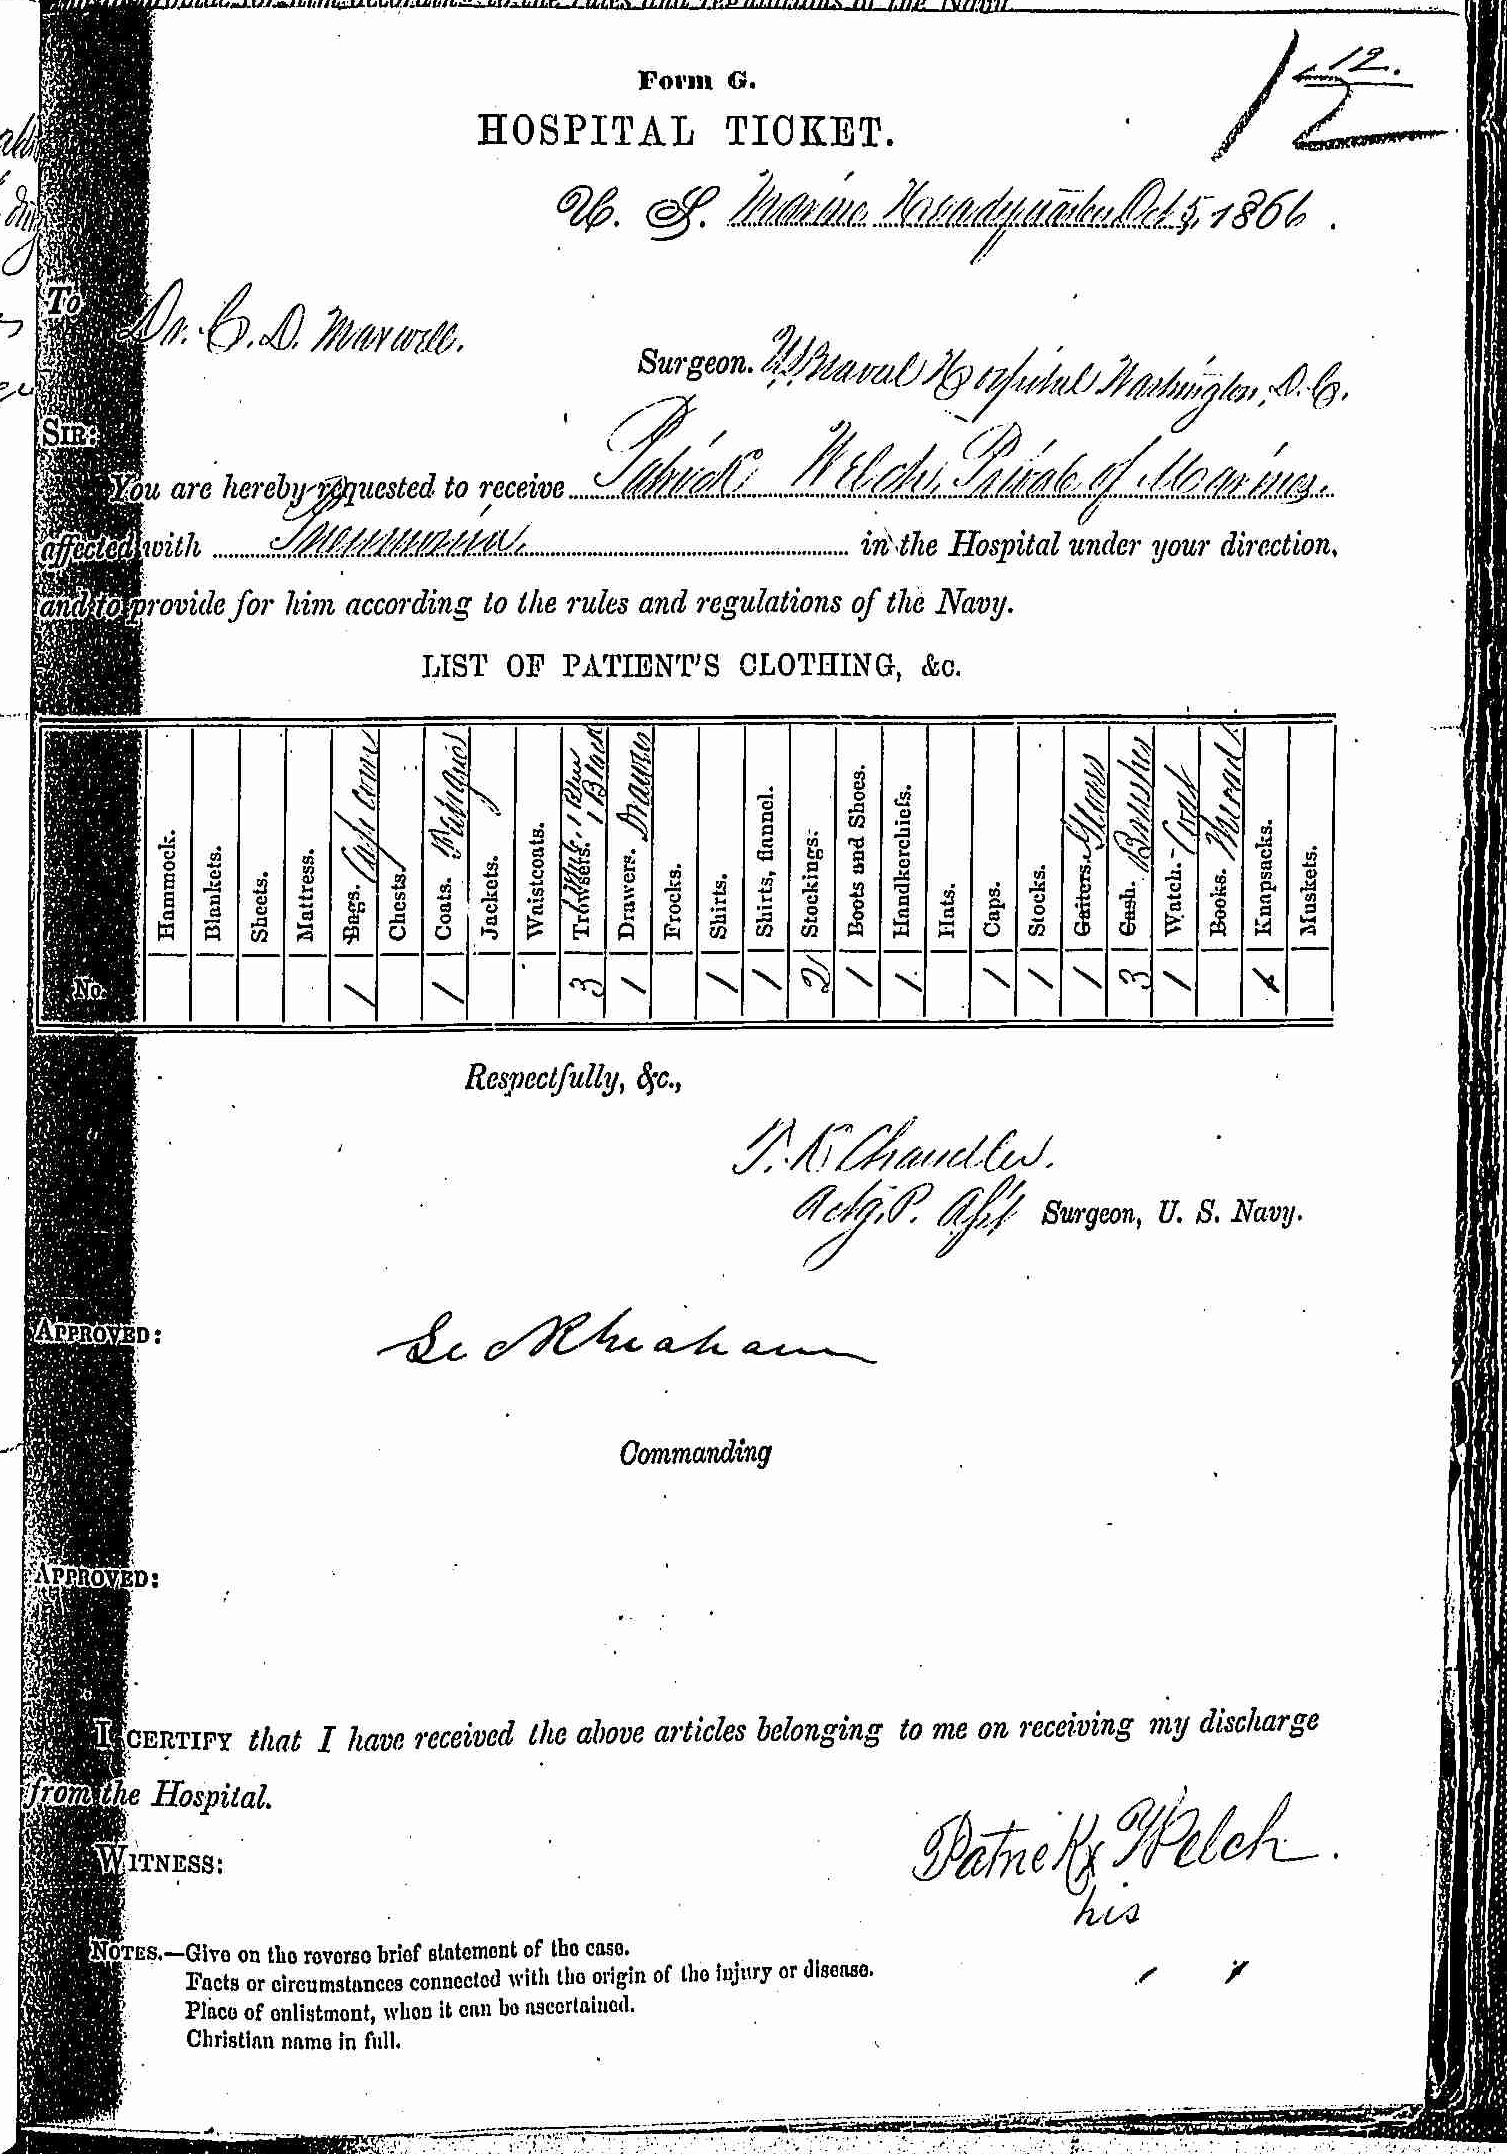 Entry for Patrick Welch (page 1 of 2) in the log Hospital Tickets and Case Papers - Naval Hospital - Washington, D.C. - 1865-68